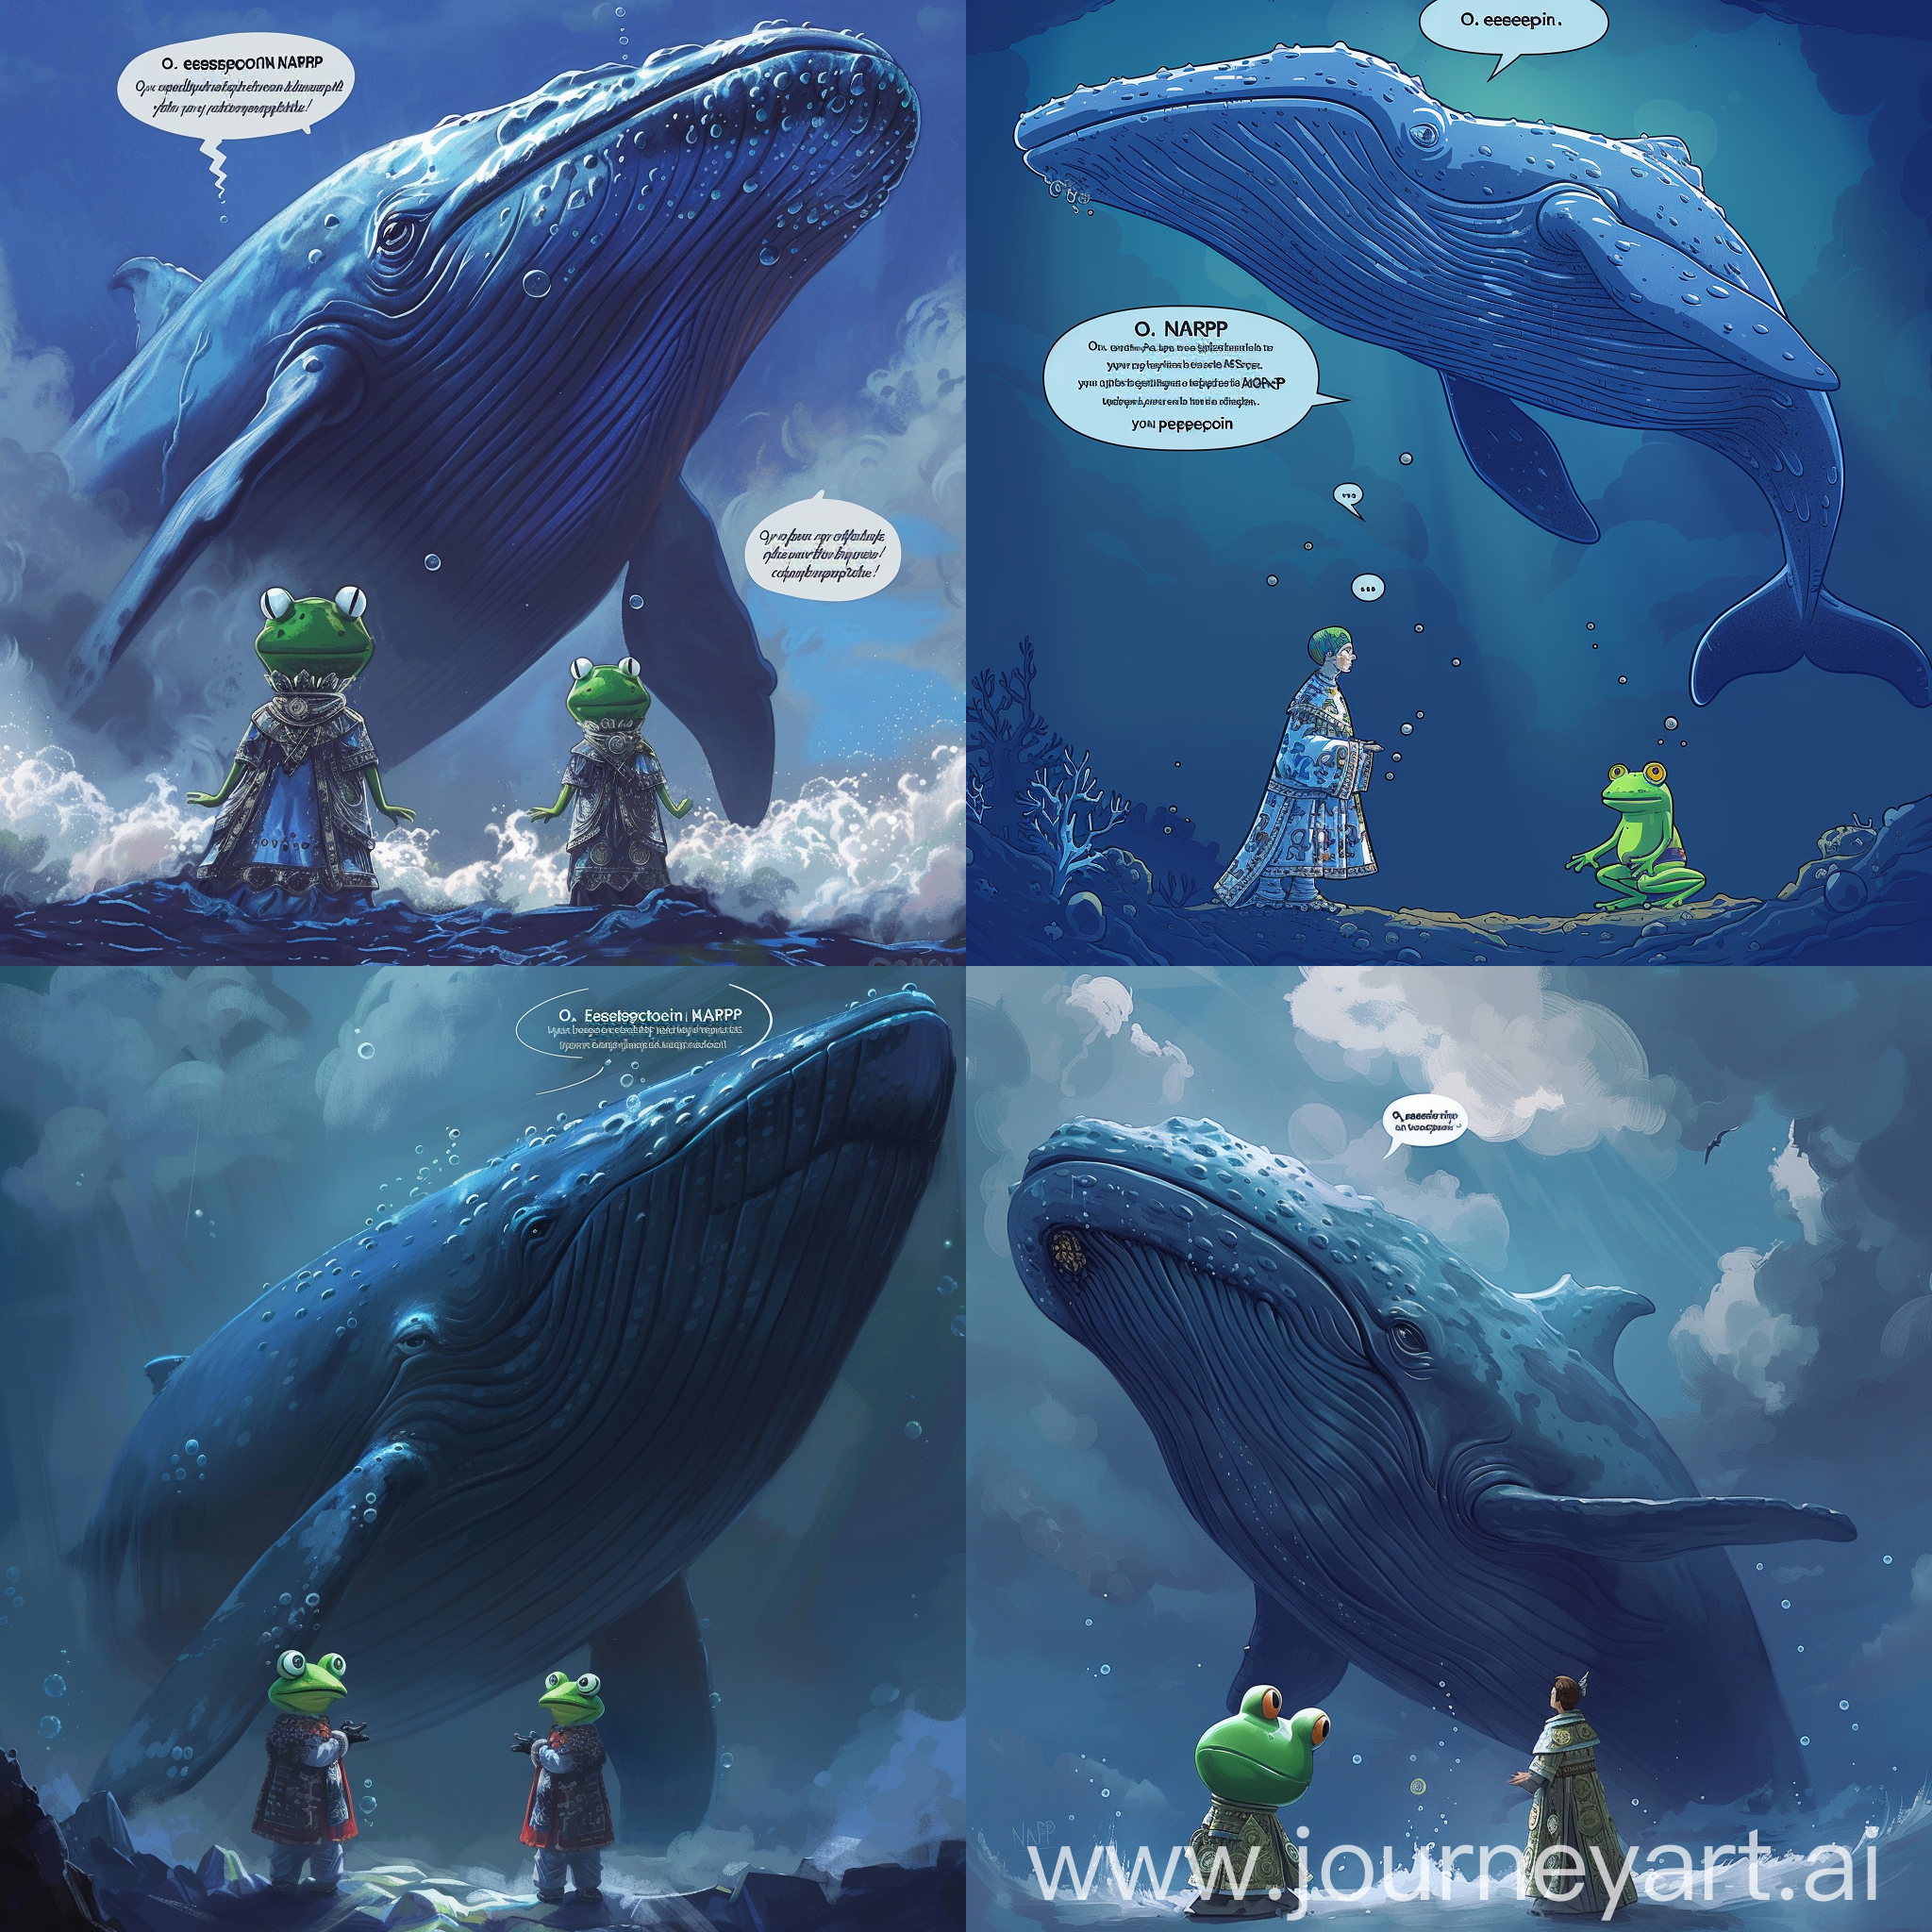 NARP portrayed as a magnificent and majestic blue whale icon, towering above the crypto landscape, with a serene and commanding presence. Its form radiates strength and wisdom, symbolizing its status as a revered figure within the crypto community.
PepeCoin depicted as a humble and respectful supplicant, adorned in ceremonial attire adorned with images of its iconic green frog mascot, bowing before NARP with a reverent demeanor and hopeful eyes.
Speech bubbles above PepeCoin: "Oh esteemed NARP, guardian of the crypto seas, we humbly implore thee for thy divine blessing upon our beloved PepeCoin!"
NARP, with a serene and knowing expression, gazes down upon PepeCoin with a mixture of benevolence and amusement, its whale iconography exuding a sense of calm authority.
Speech bubble above NARP: "Your request intrigues me, dear PepeCoin. What tribute do you offer in exchange for my favor?"
Caption:

"In the vast ocean of the crypto world, PepeCoin, adorned in regal attire, ventures to the depths where NARP, the mighty blue whale icon, reigns supreme. Will their offering be sufficient to earn his coveted blessing and favor?"